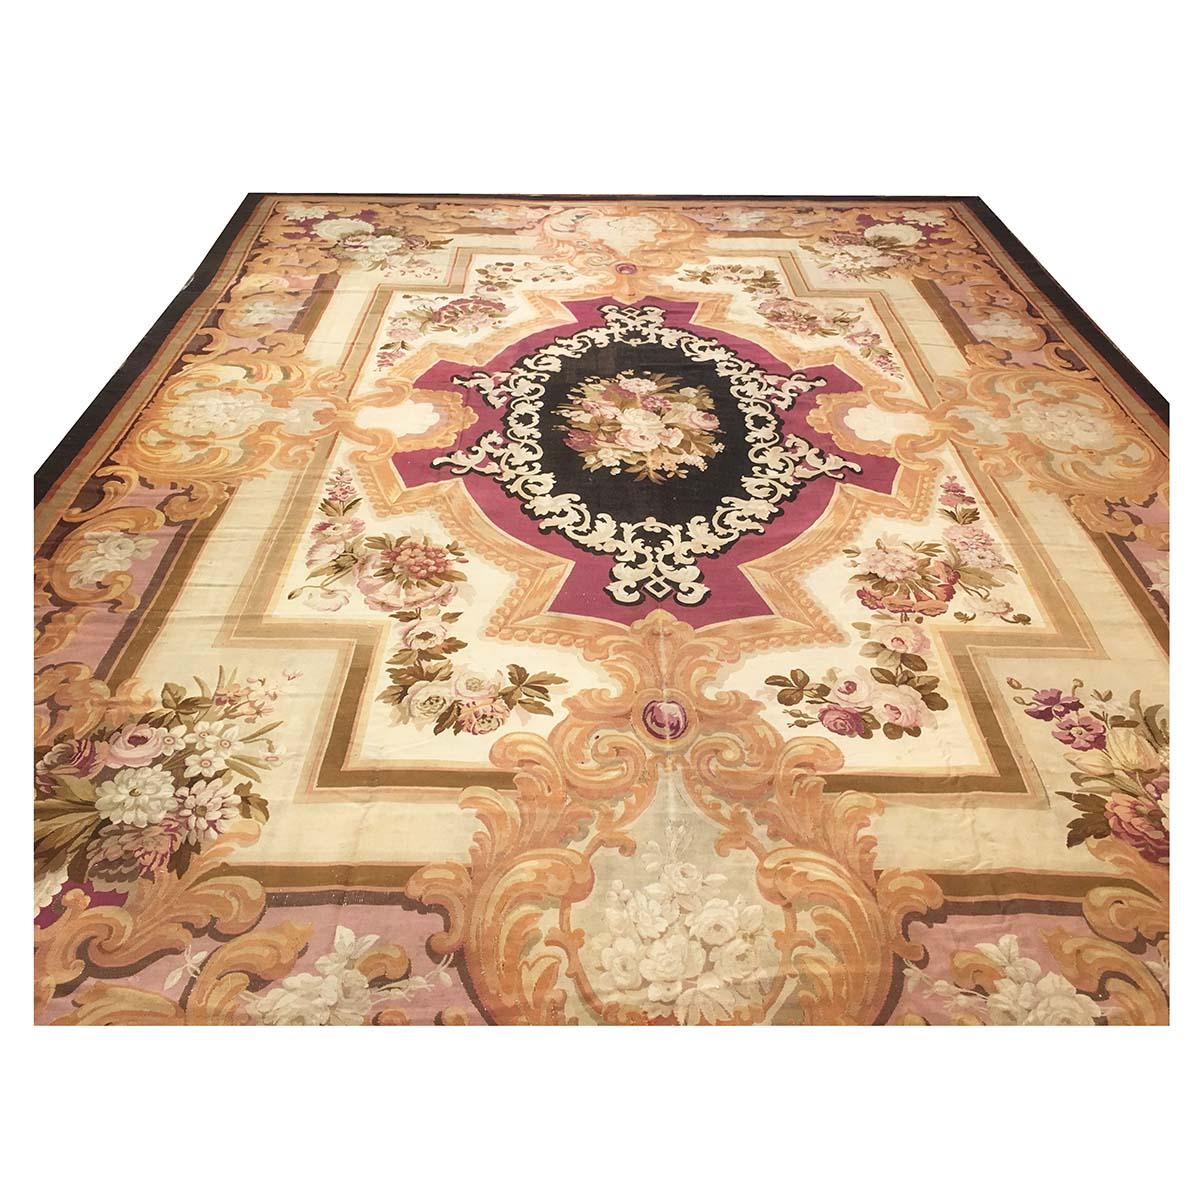 Ashly Fine Rugs Presents an 19th Century Aubusson Tapestry Rug This carpet is stylistic evolution of a Classic French carpet, with strong burgundy and elegant black and soft mauve colors rounded by Ivory fields.
This rug is dated to around the 1880s